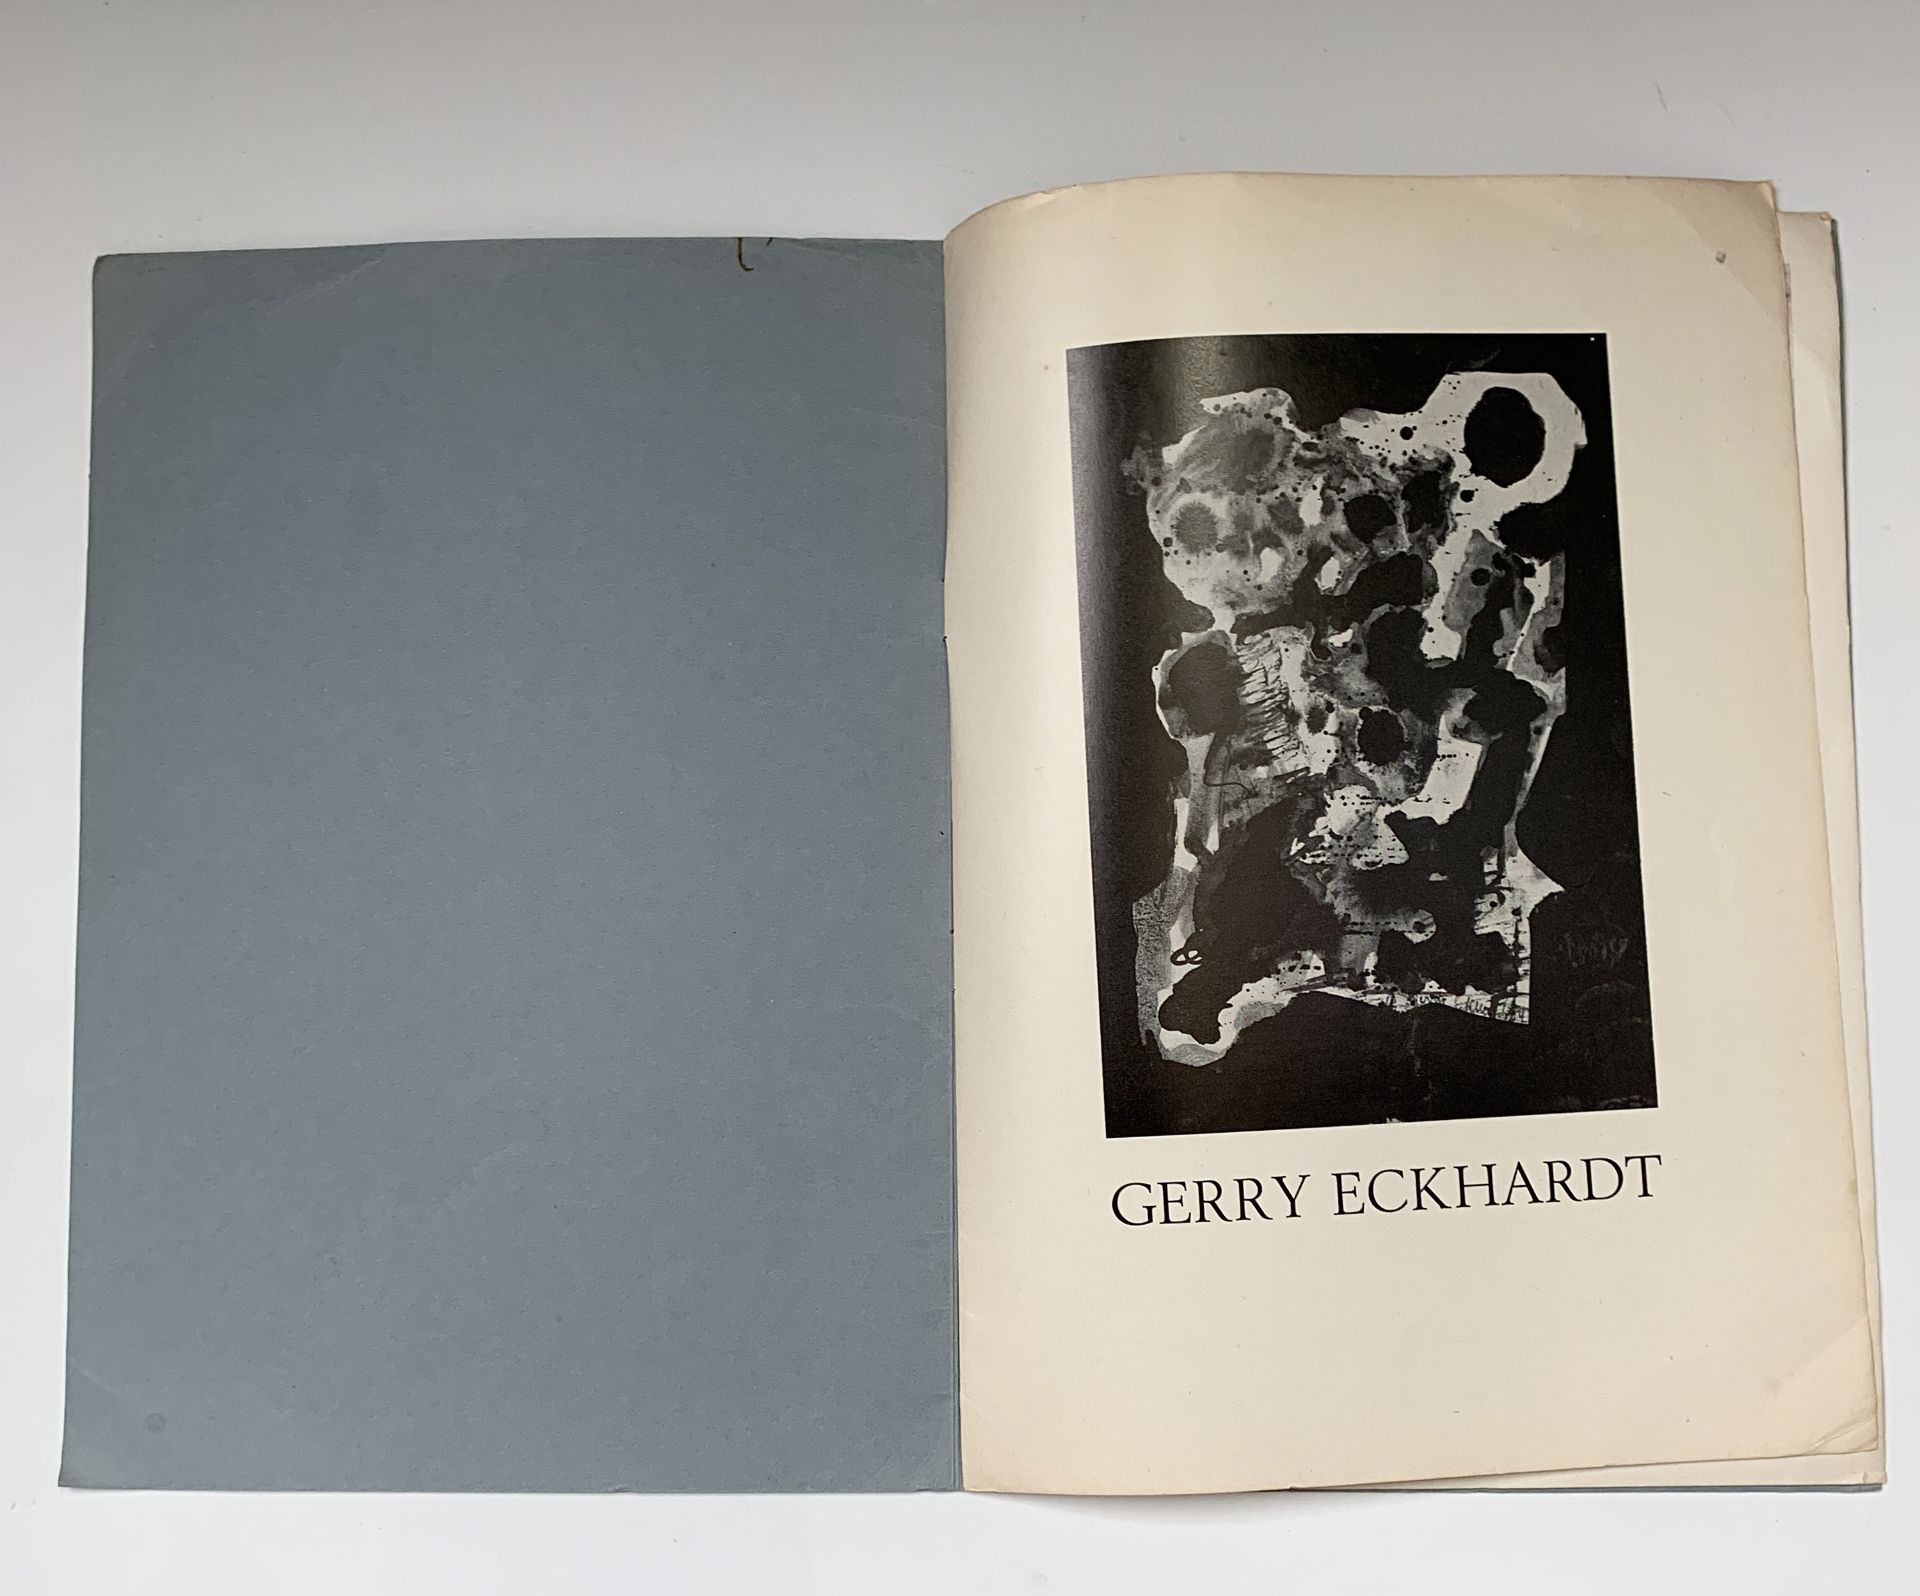 GERRY ECKHARDT. Two Exhibition Catalogues. Lindnersplan, Stockholm, signed by artist in 1965. - Image 2 of 2